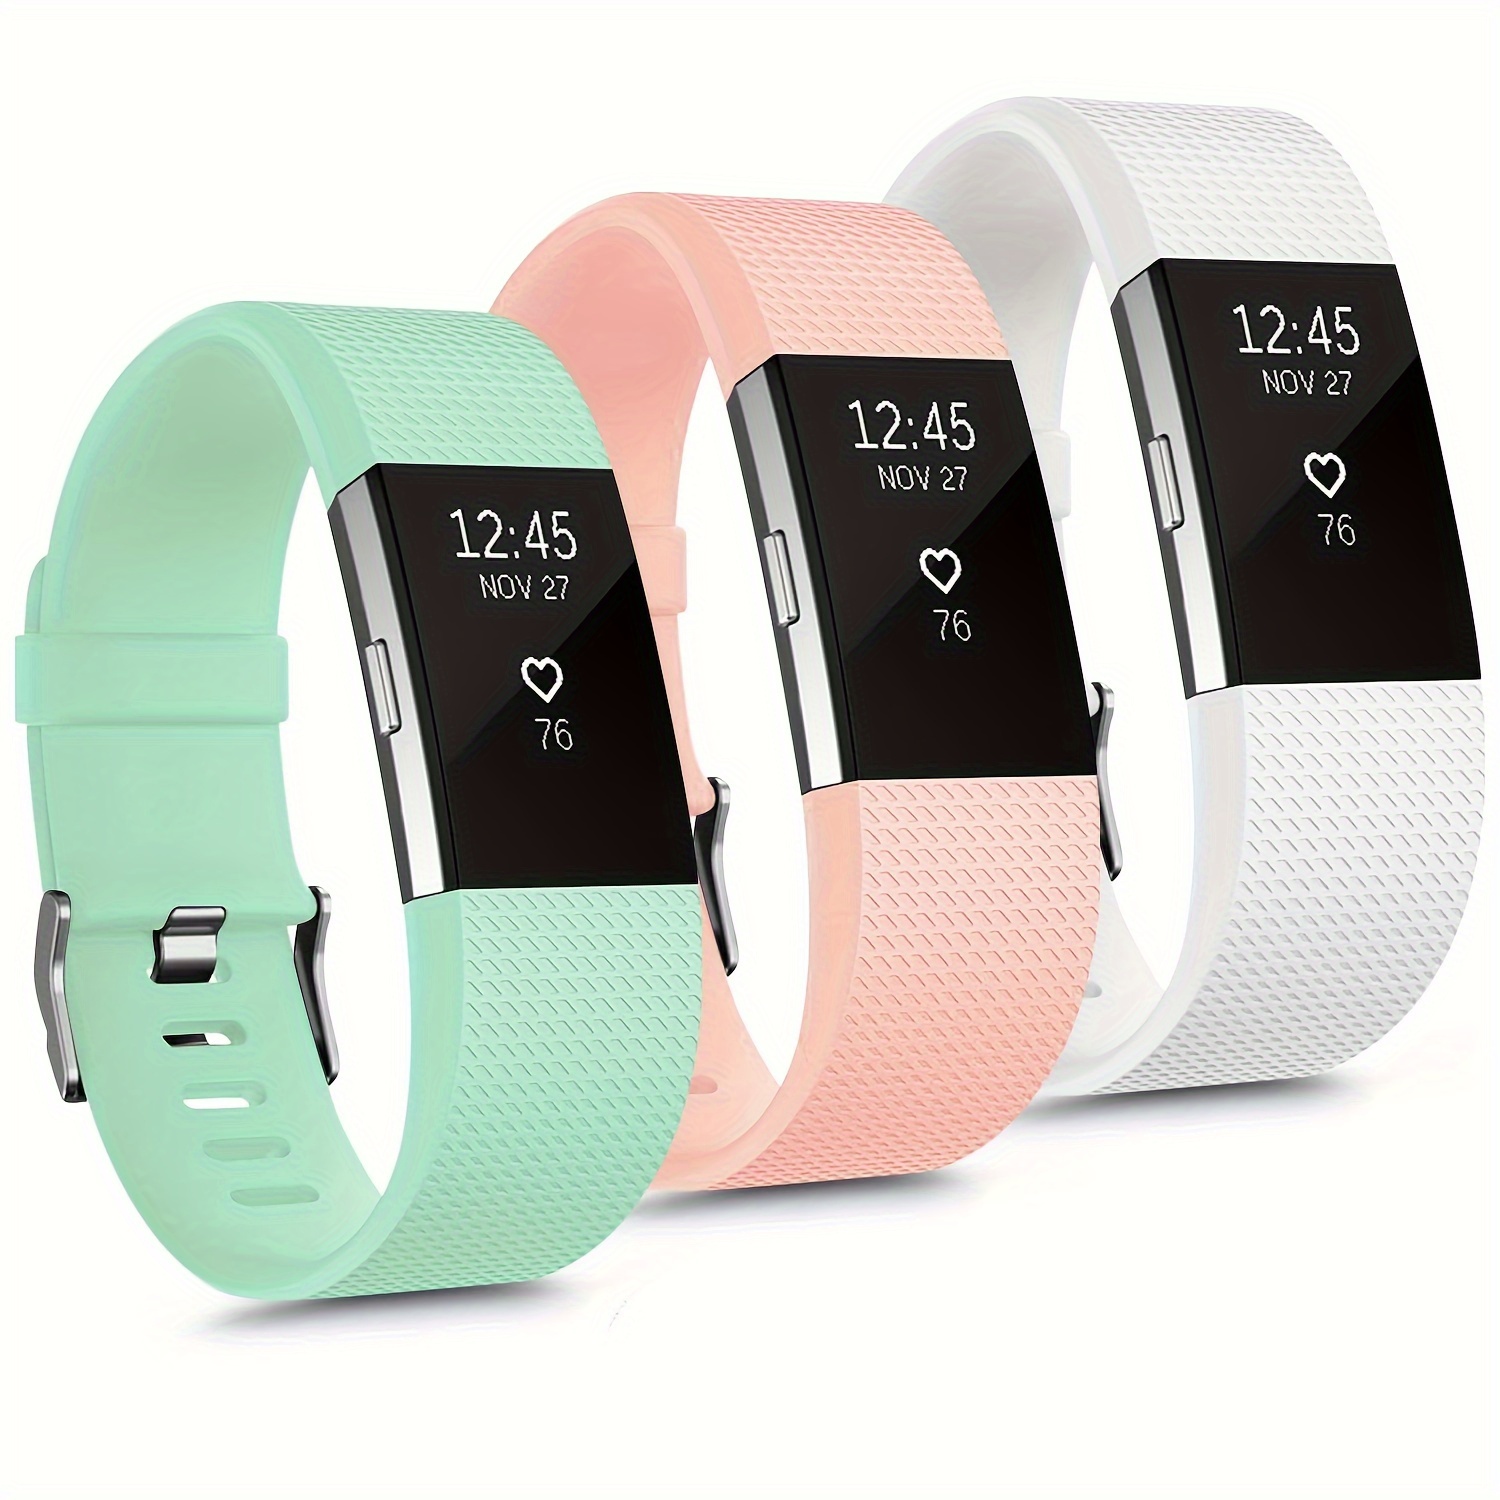 Bitbelt Band Lock for Magicband, Fitbit,Vivofit- 2 Pack 90 Day Warranty. We  Invented The Fitbit Clasp fix. (Clear)